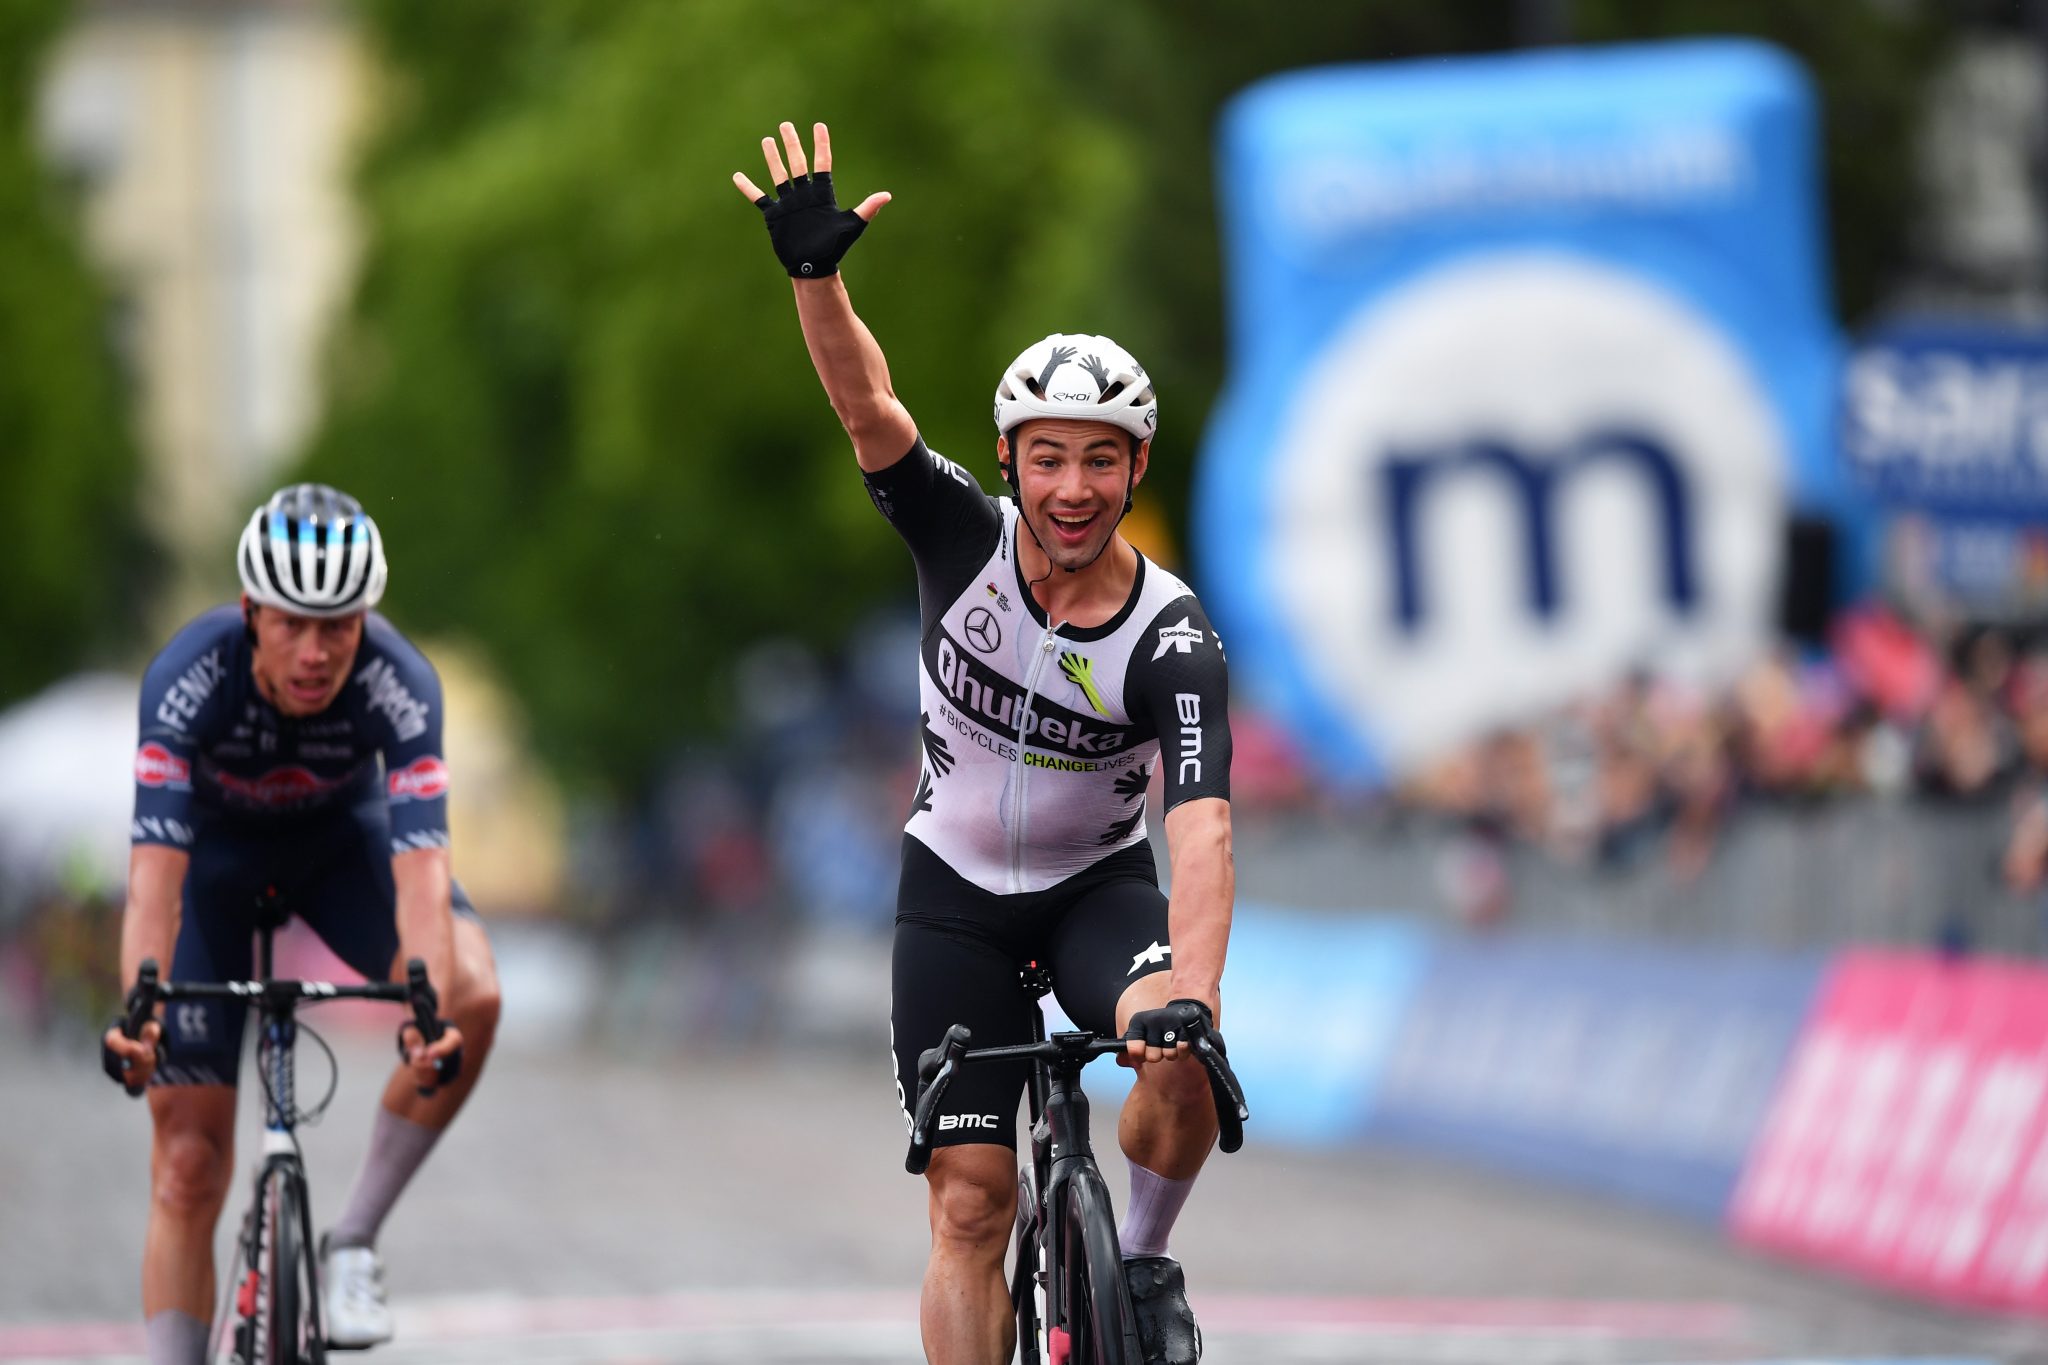 Victor Campenaerts wins stage 15 of the Giro d'Italia